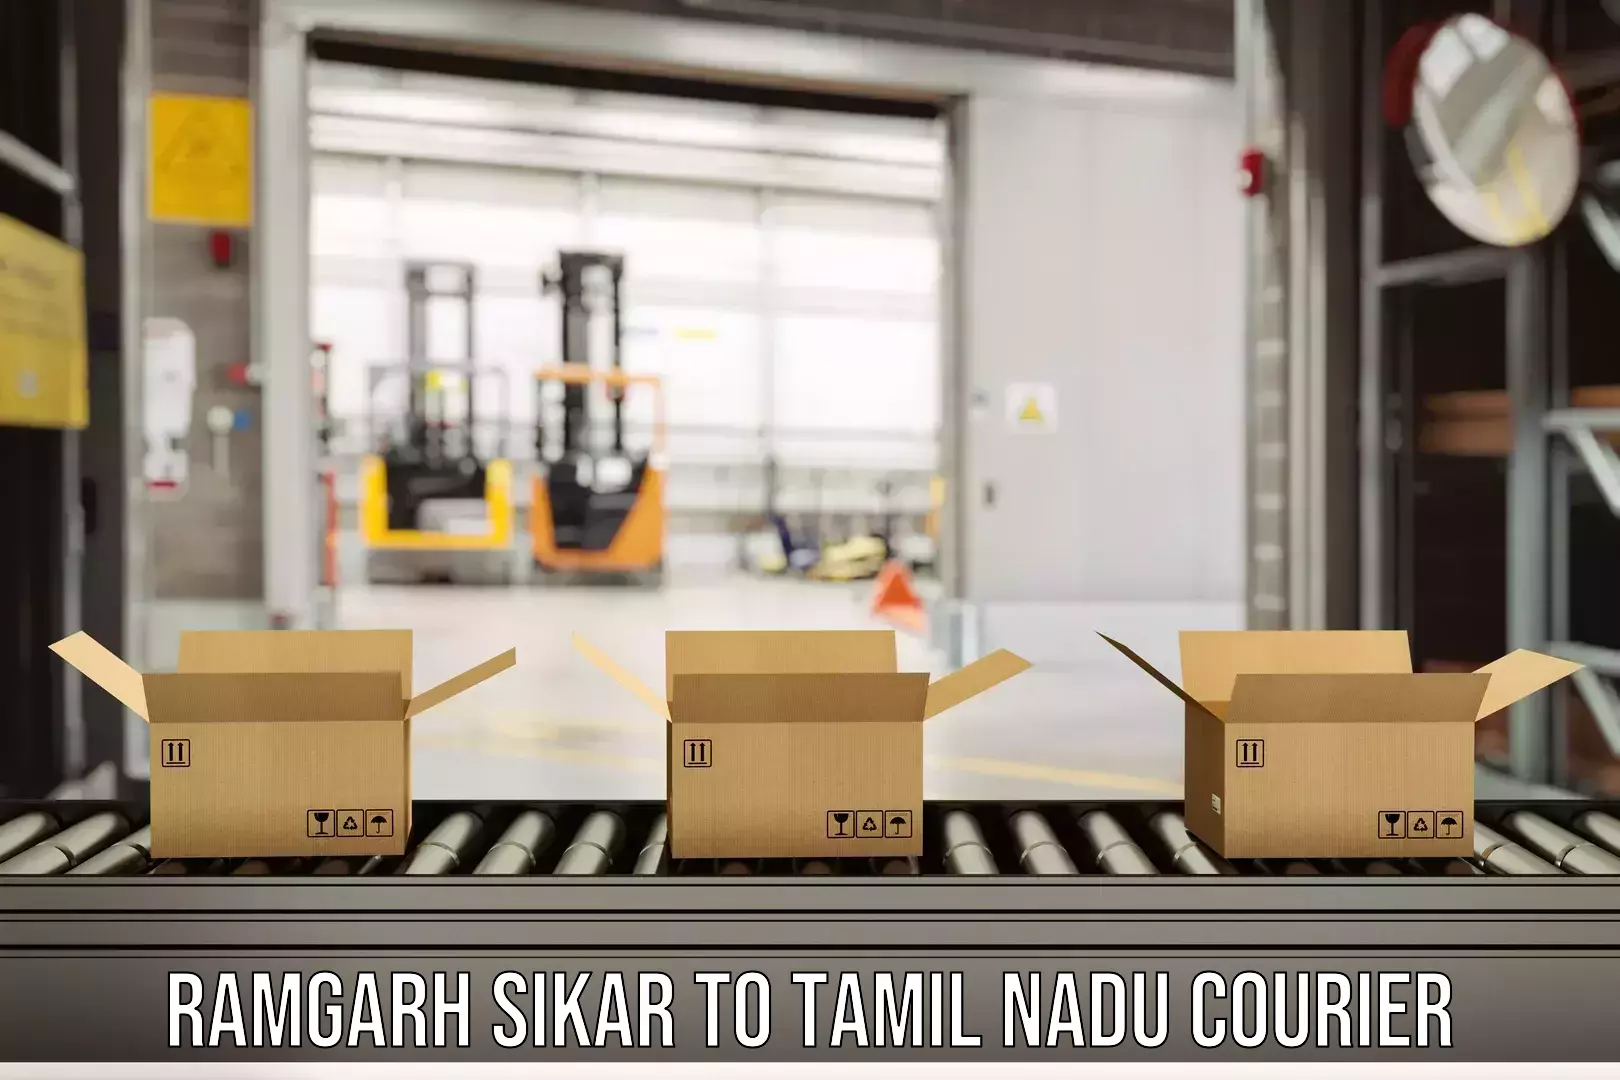 Large package courier Ramgarh Sikar to Tamil Nadu